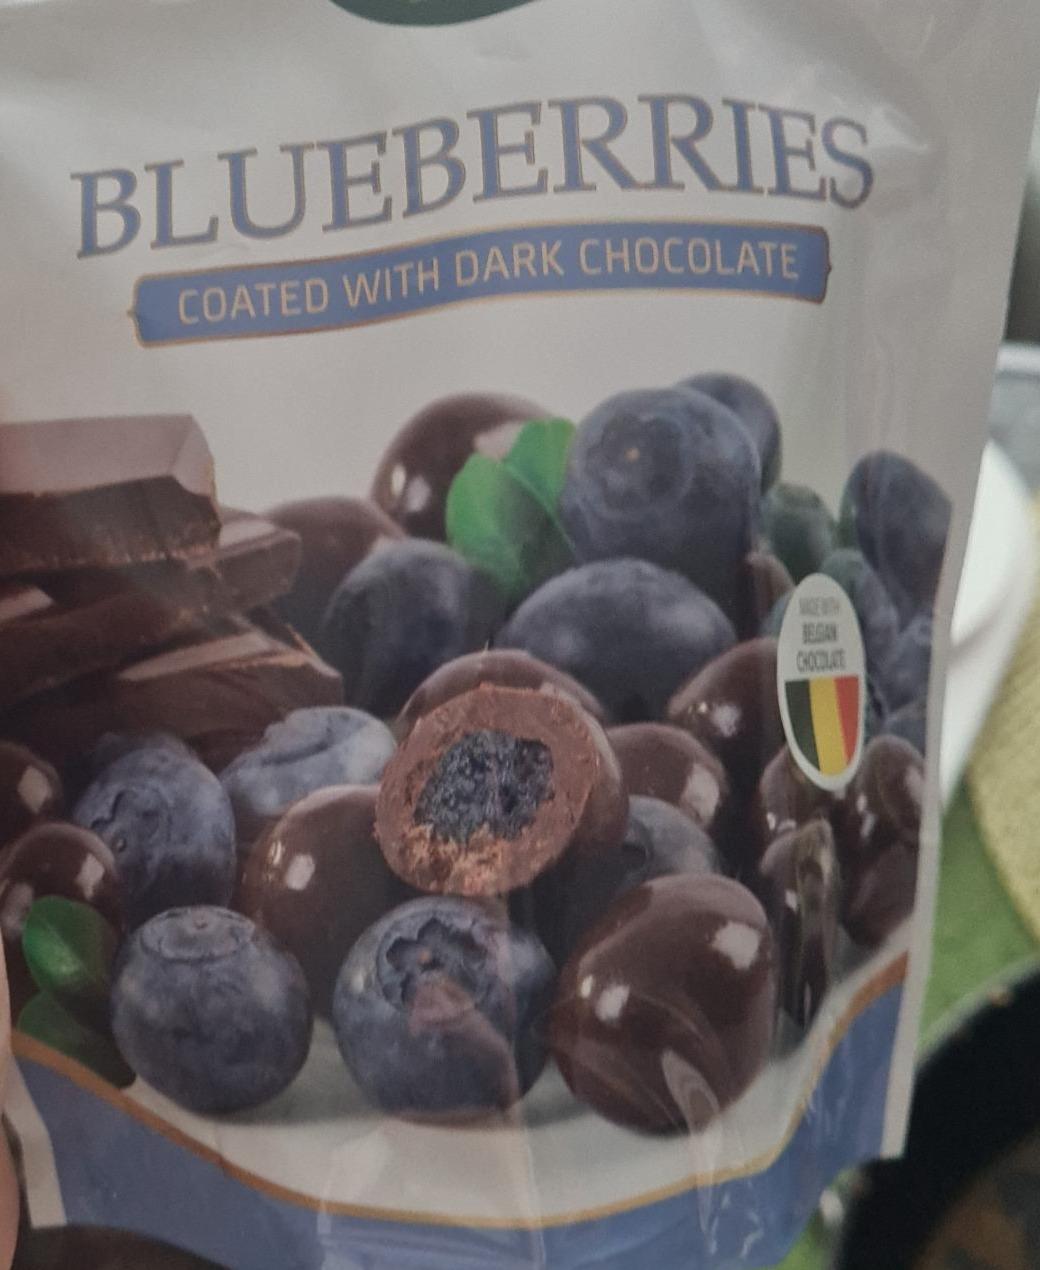 Fotografie - blueberries coated with dark chocolate Rois